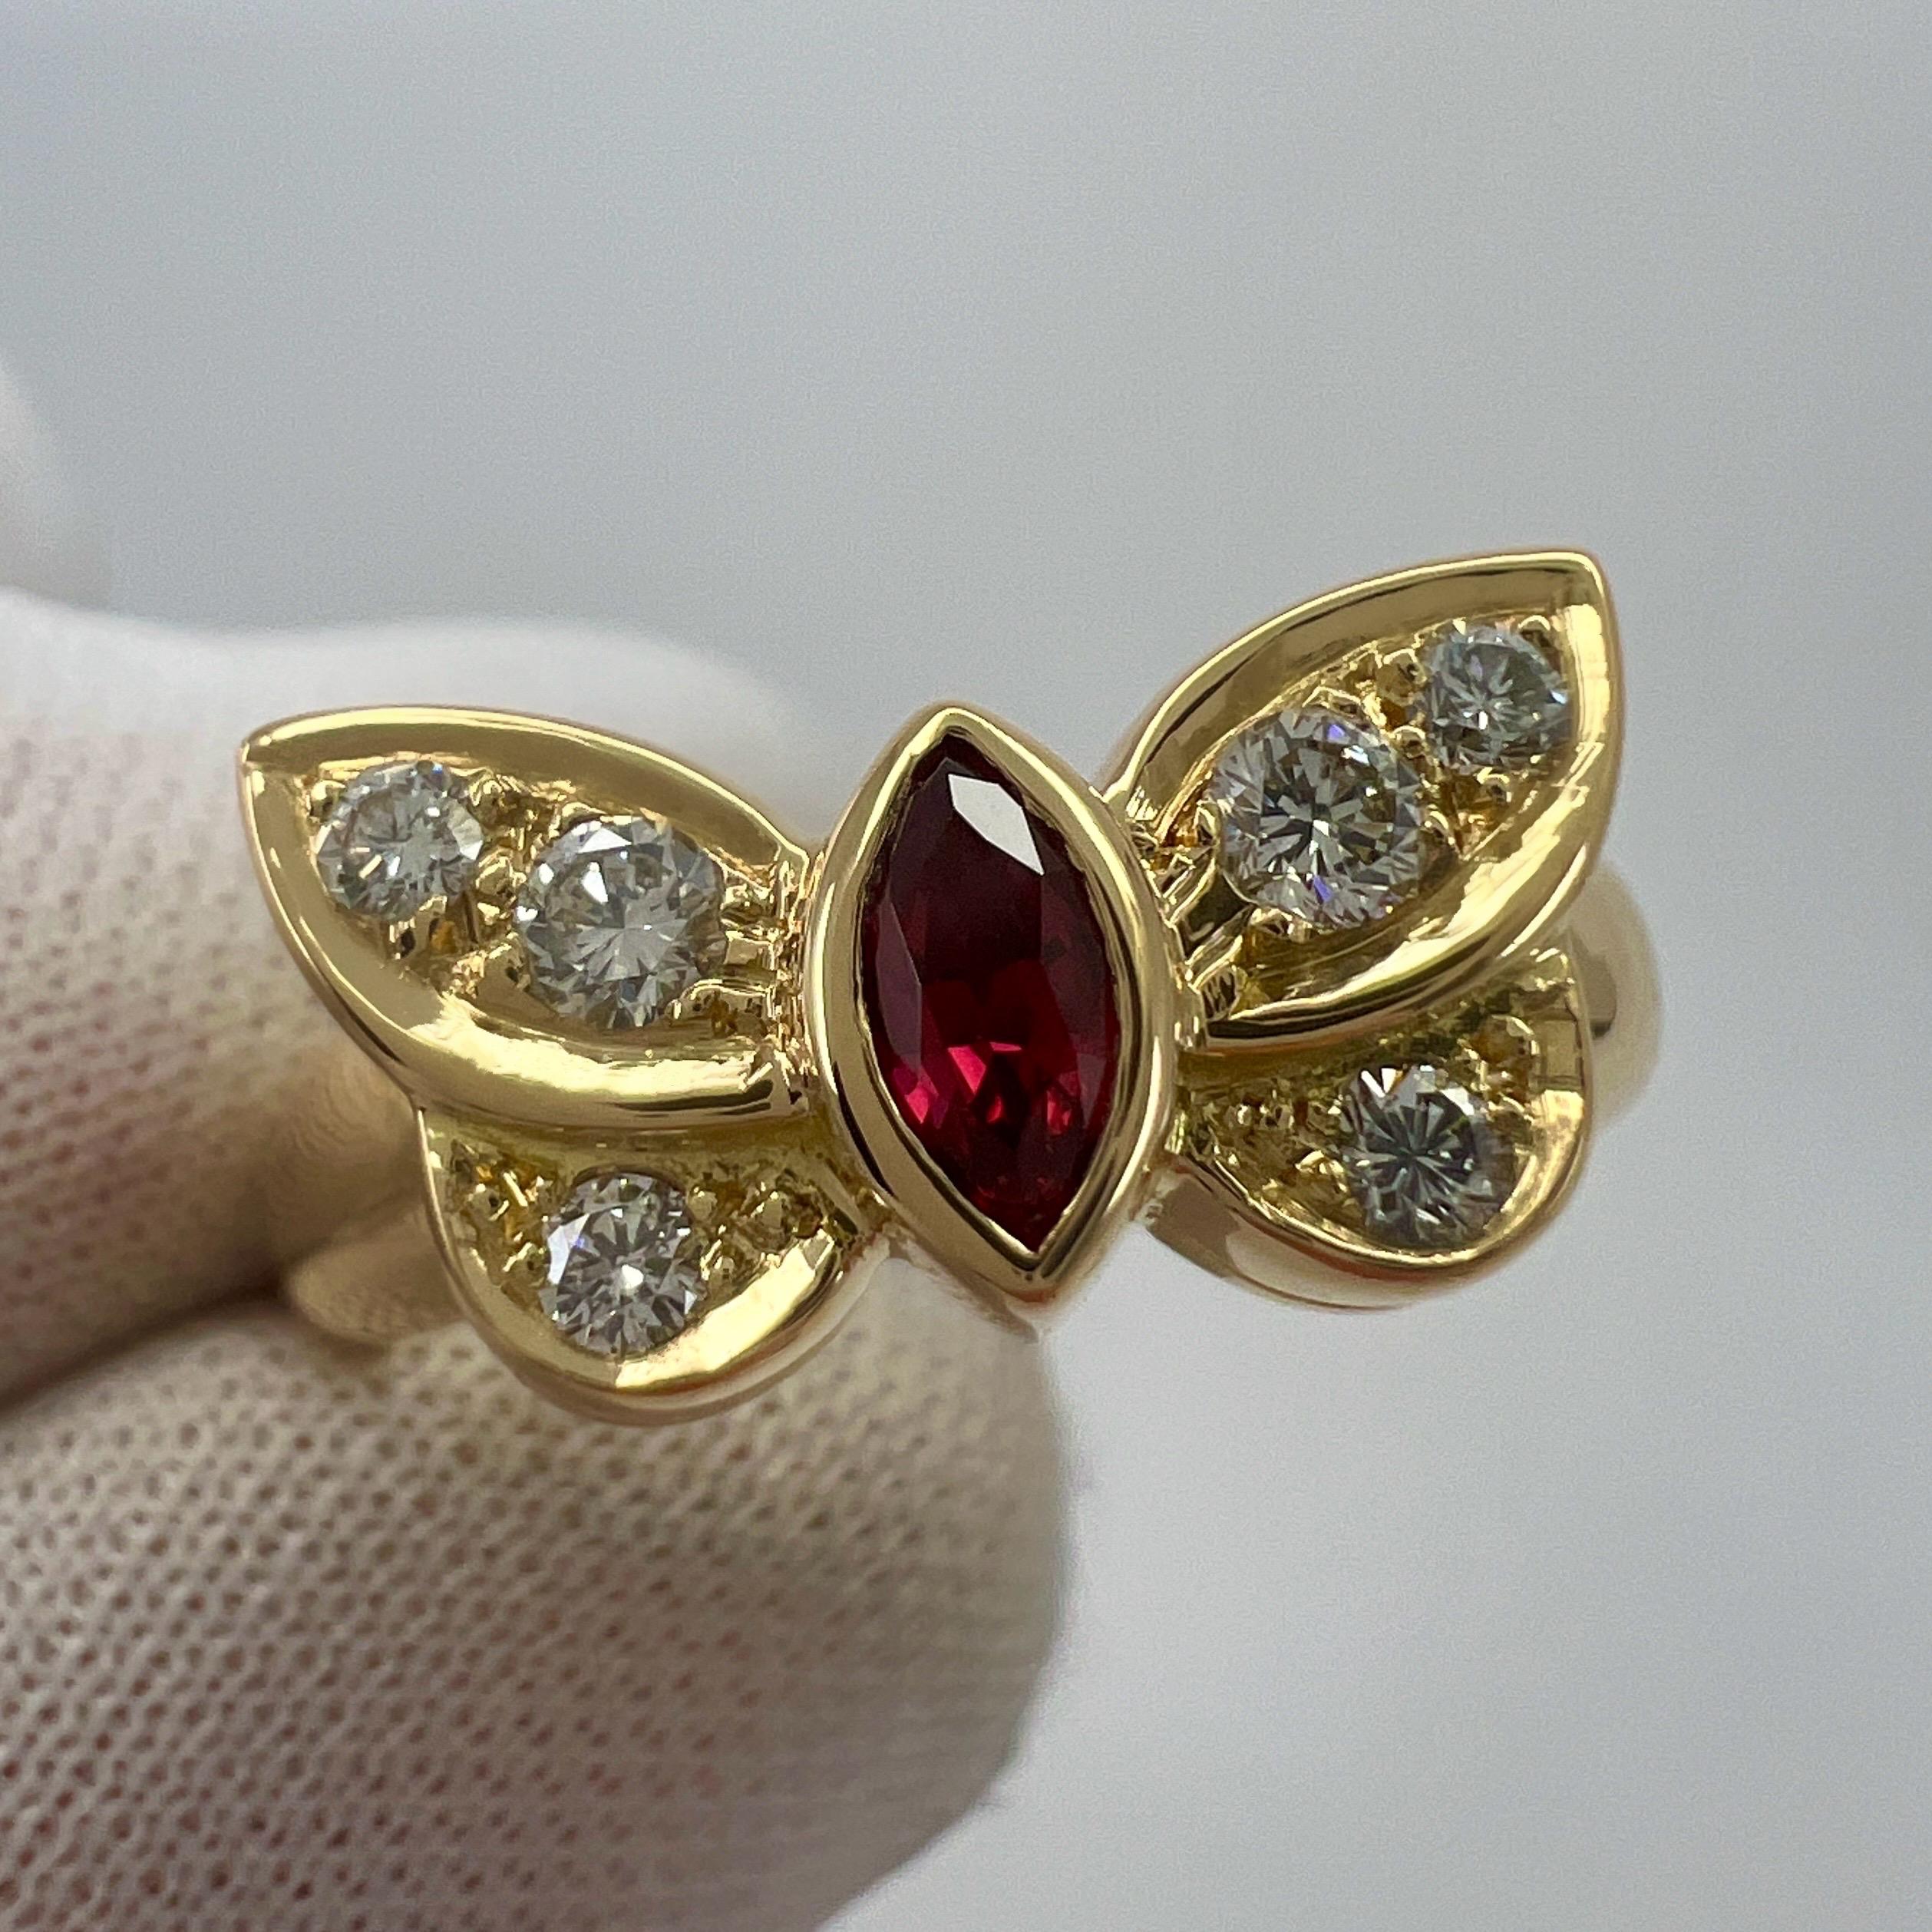 Rare Vintage Van Cleef & Arpels Fine Ruby And Diamond 18k Yellow Gold Ring.

A stunning vintage ring with a unique design typical of Van Cleef & Arpels, set with a beautiful marquise cut fine vivid red ruby measuring just under 6x4mm and accented by